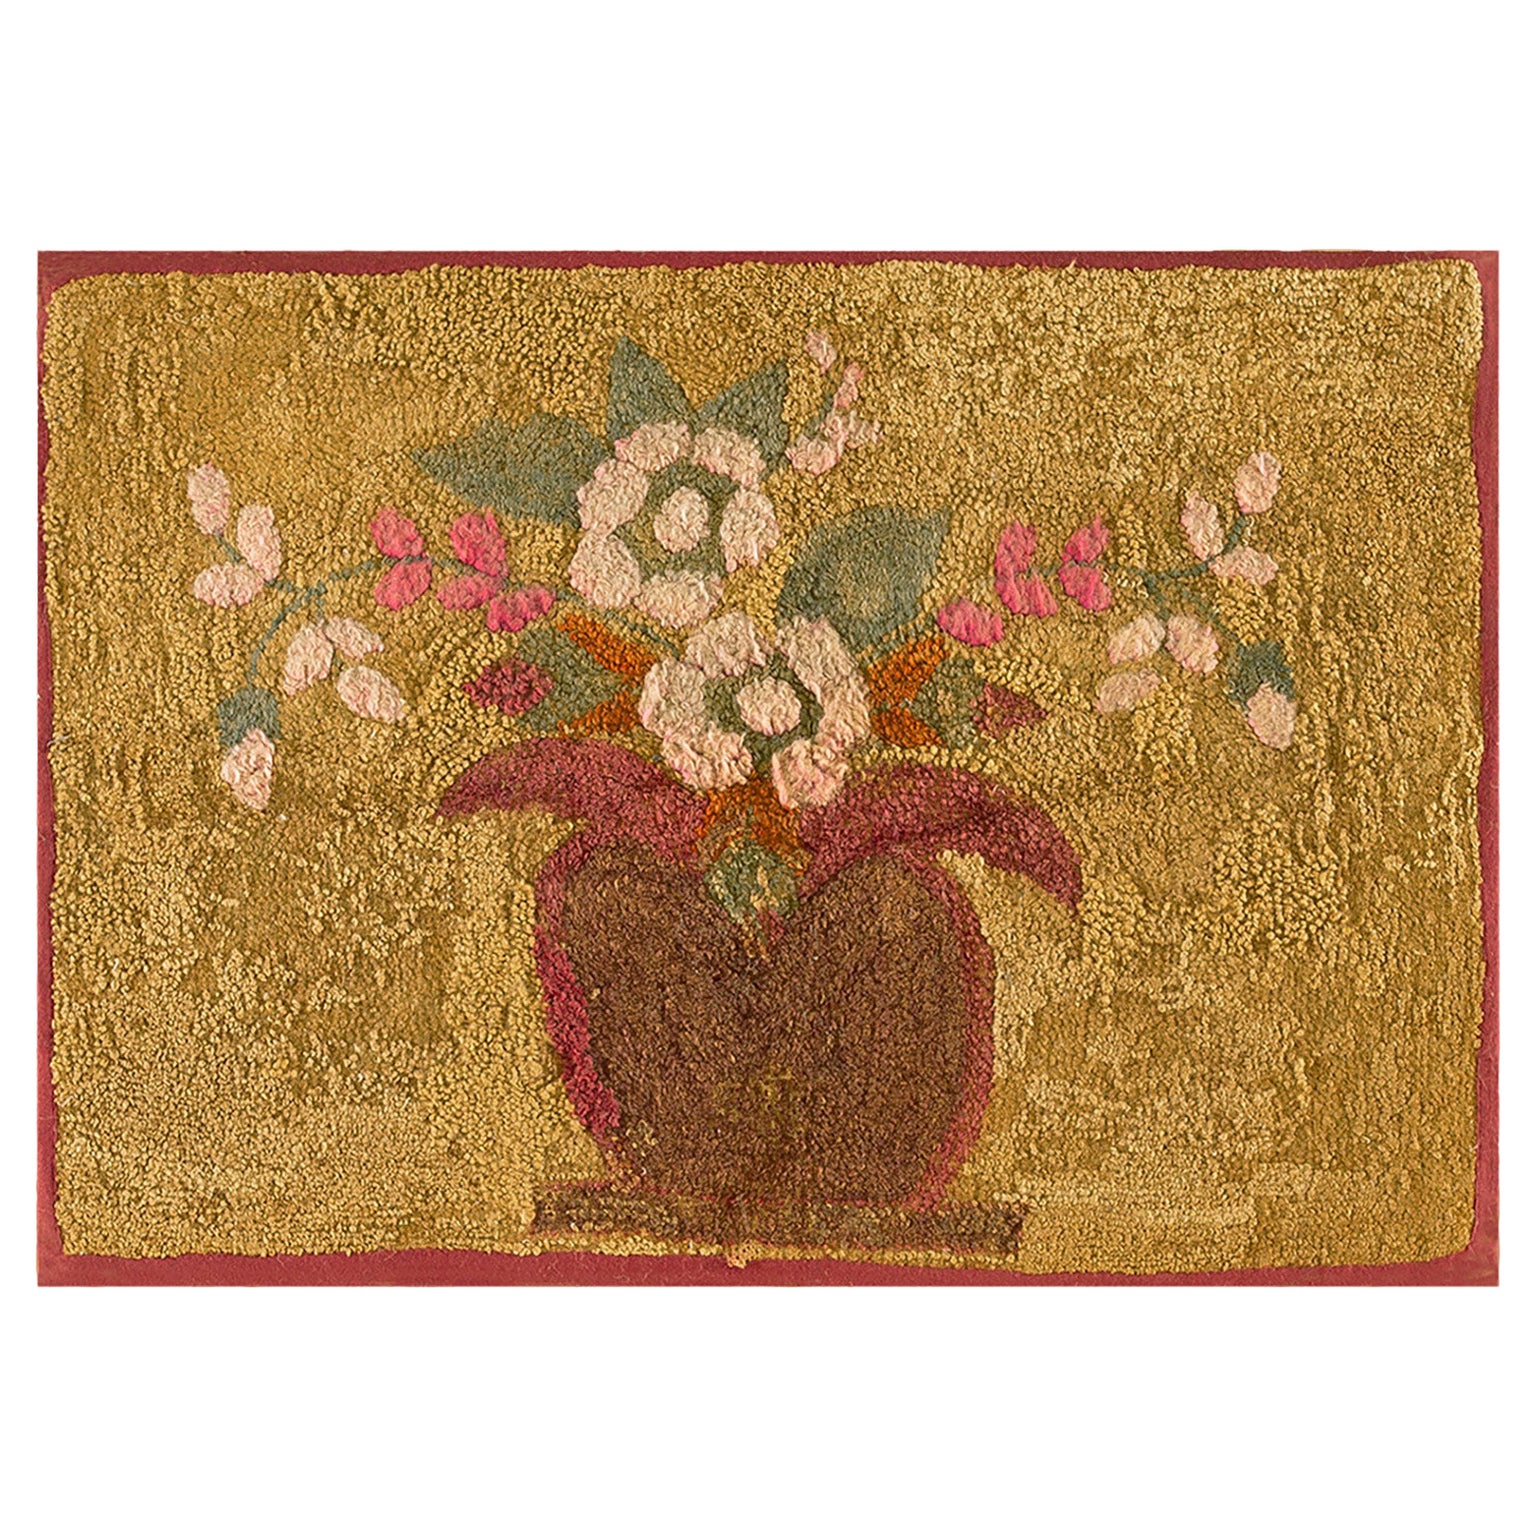 Early 20th Century American Hooked Rug ( 2'3" x 3'1" - 69 x 94 )